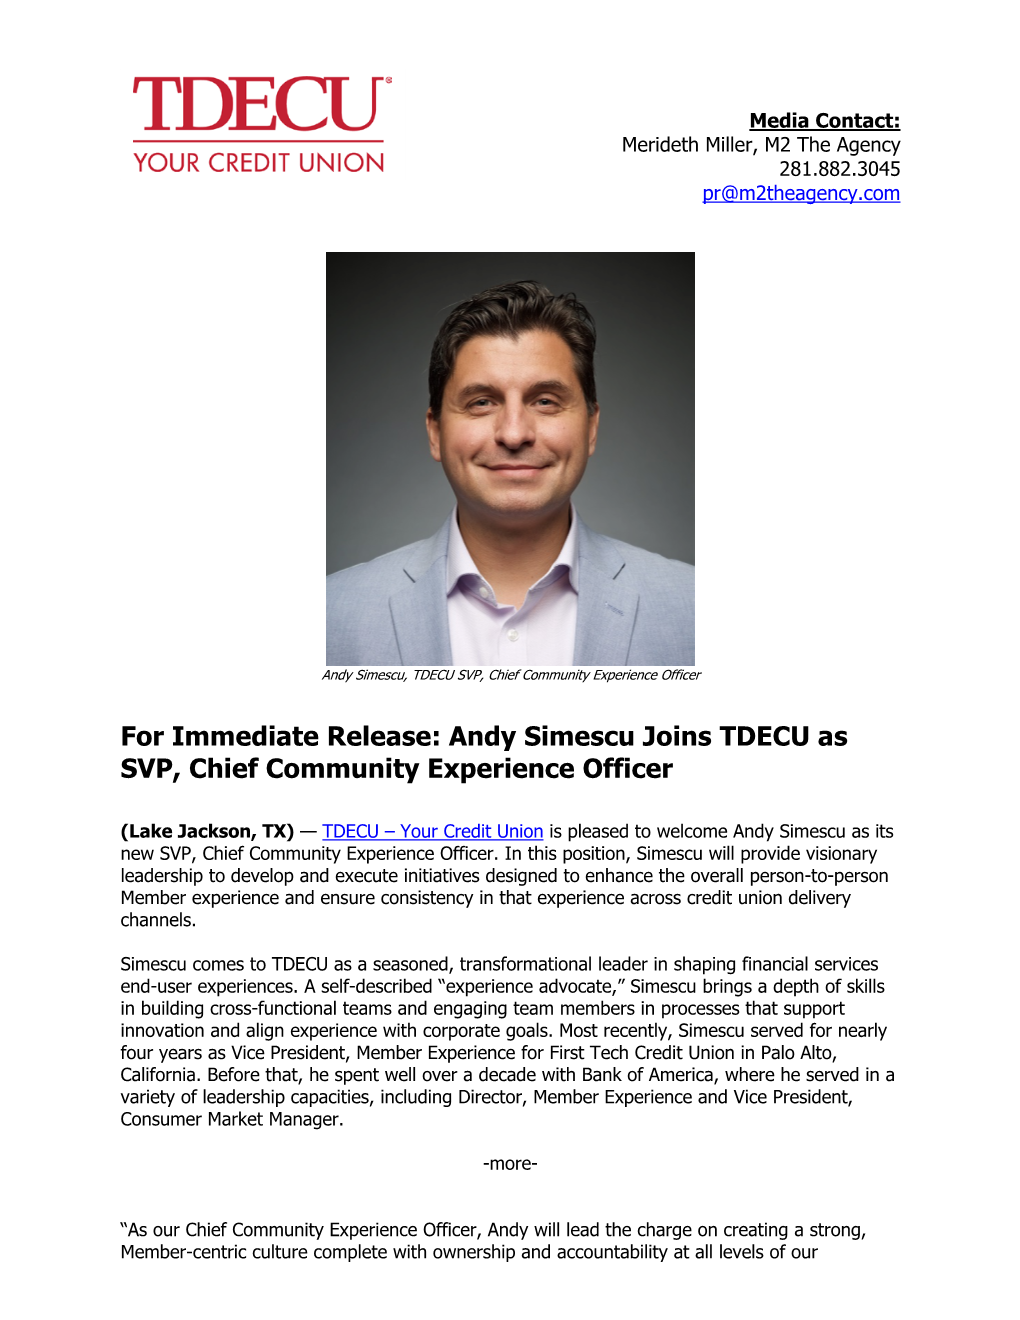 For Immediate Release: Andy Simescu Joins TDECU As SVP, Chief Community Experience Officer